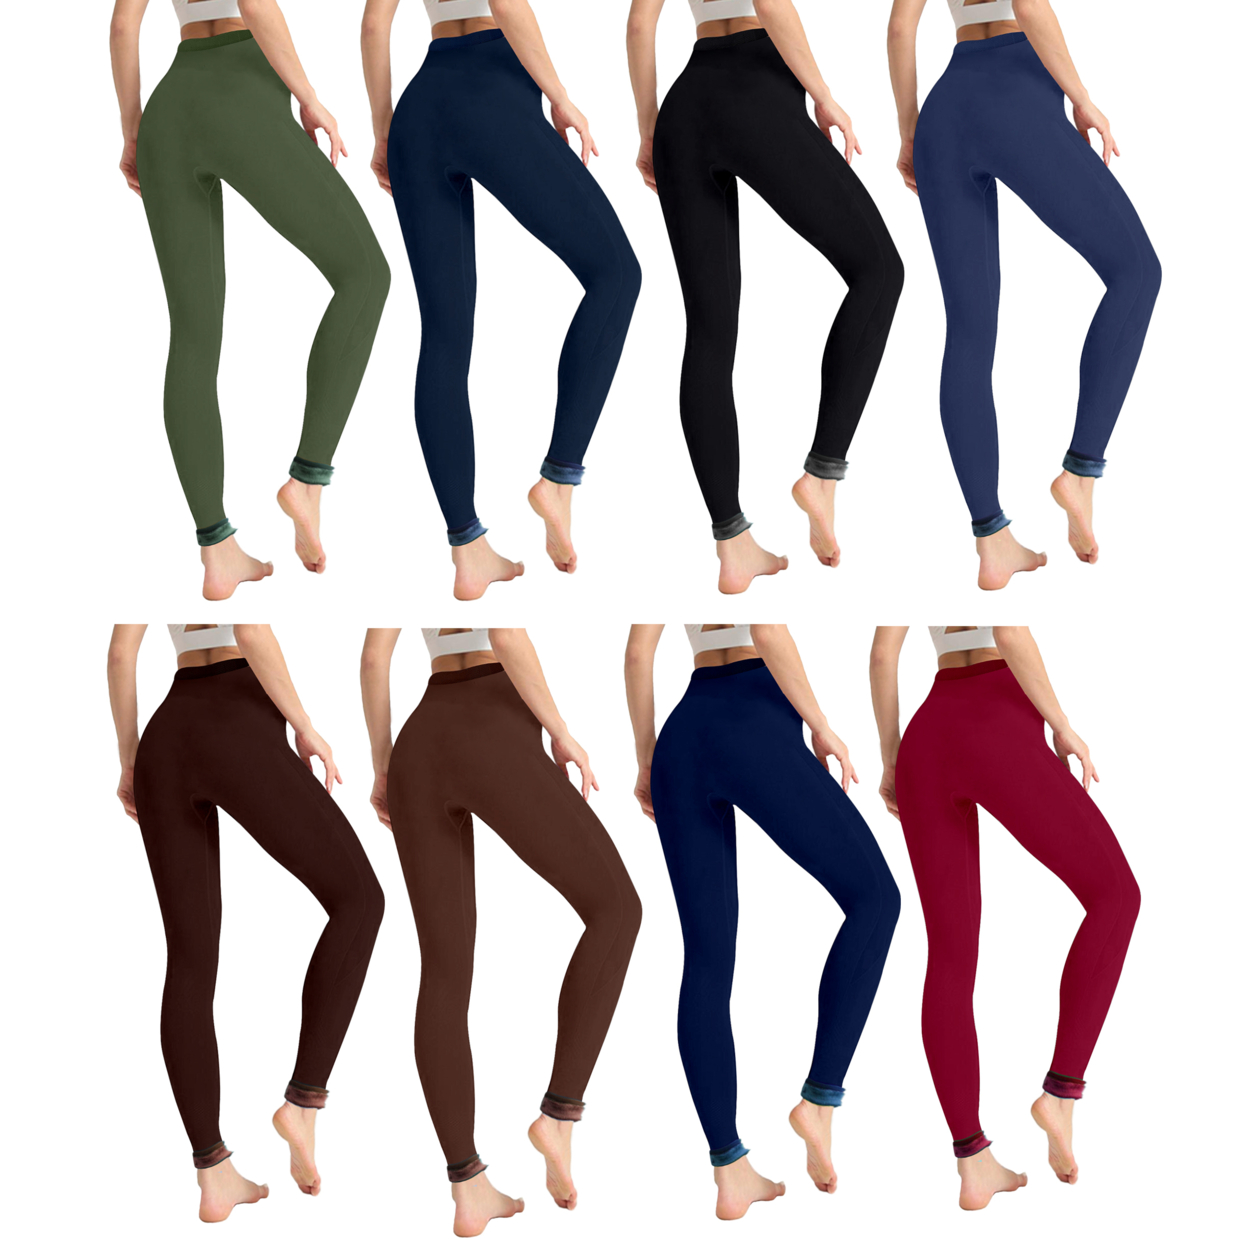 4-Pack: Women's Winter Warm Thick Fur Lined Thermal Leggings (S-2XL) - Assorted, Medium/Large